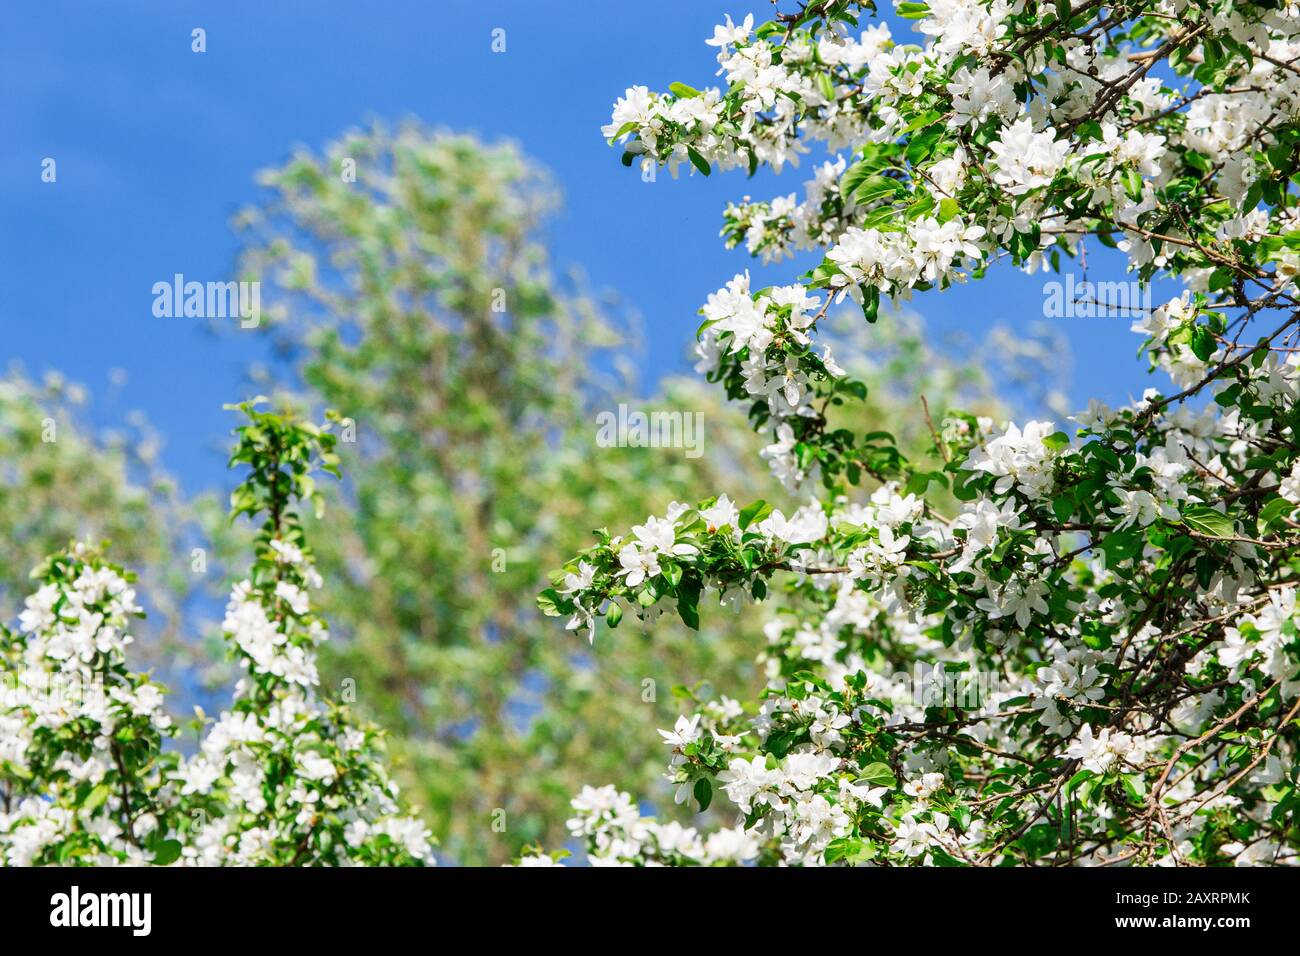 Apple blossom branches in early spring Stock Photo